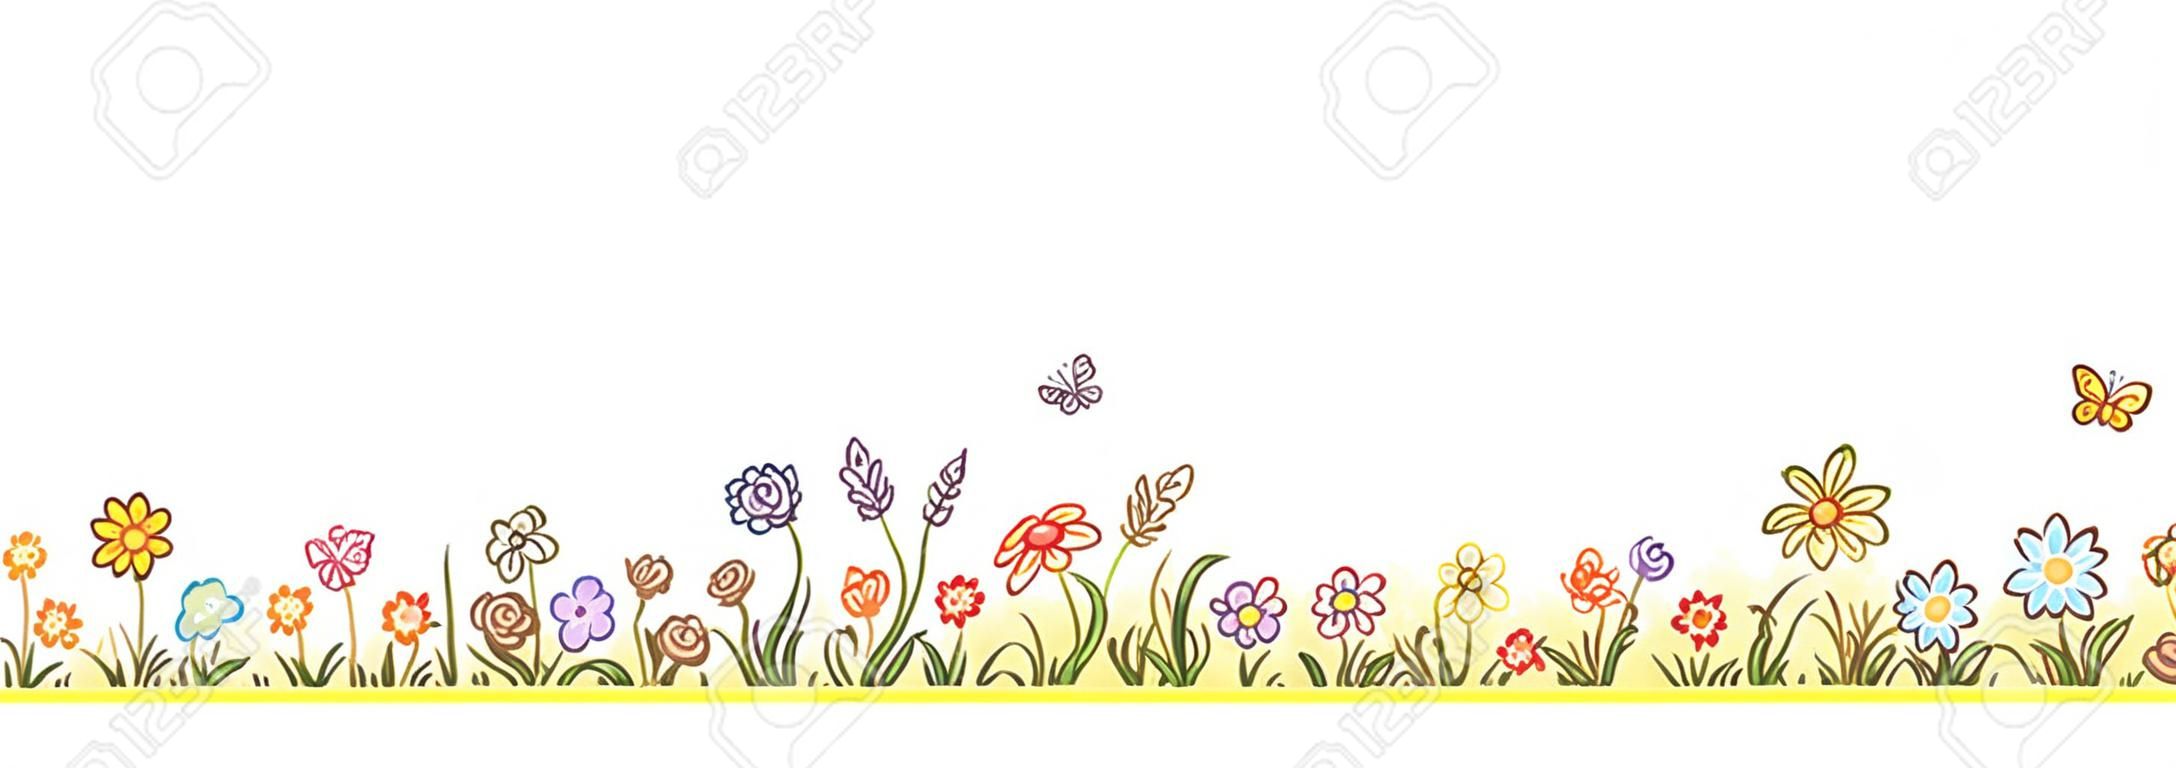 Colorful flower border with lots of cartoon flowers, grass and butterflies, no gradients